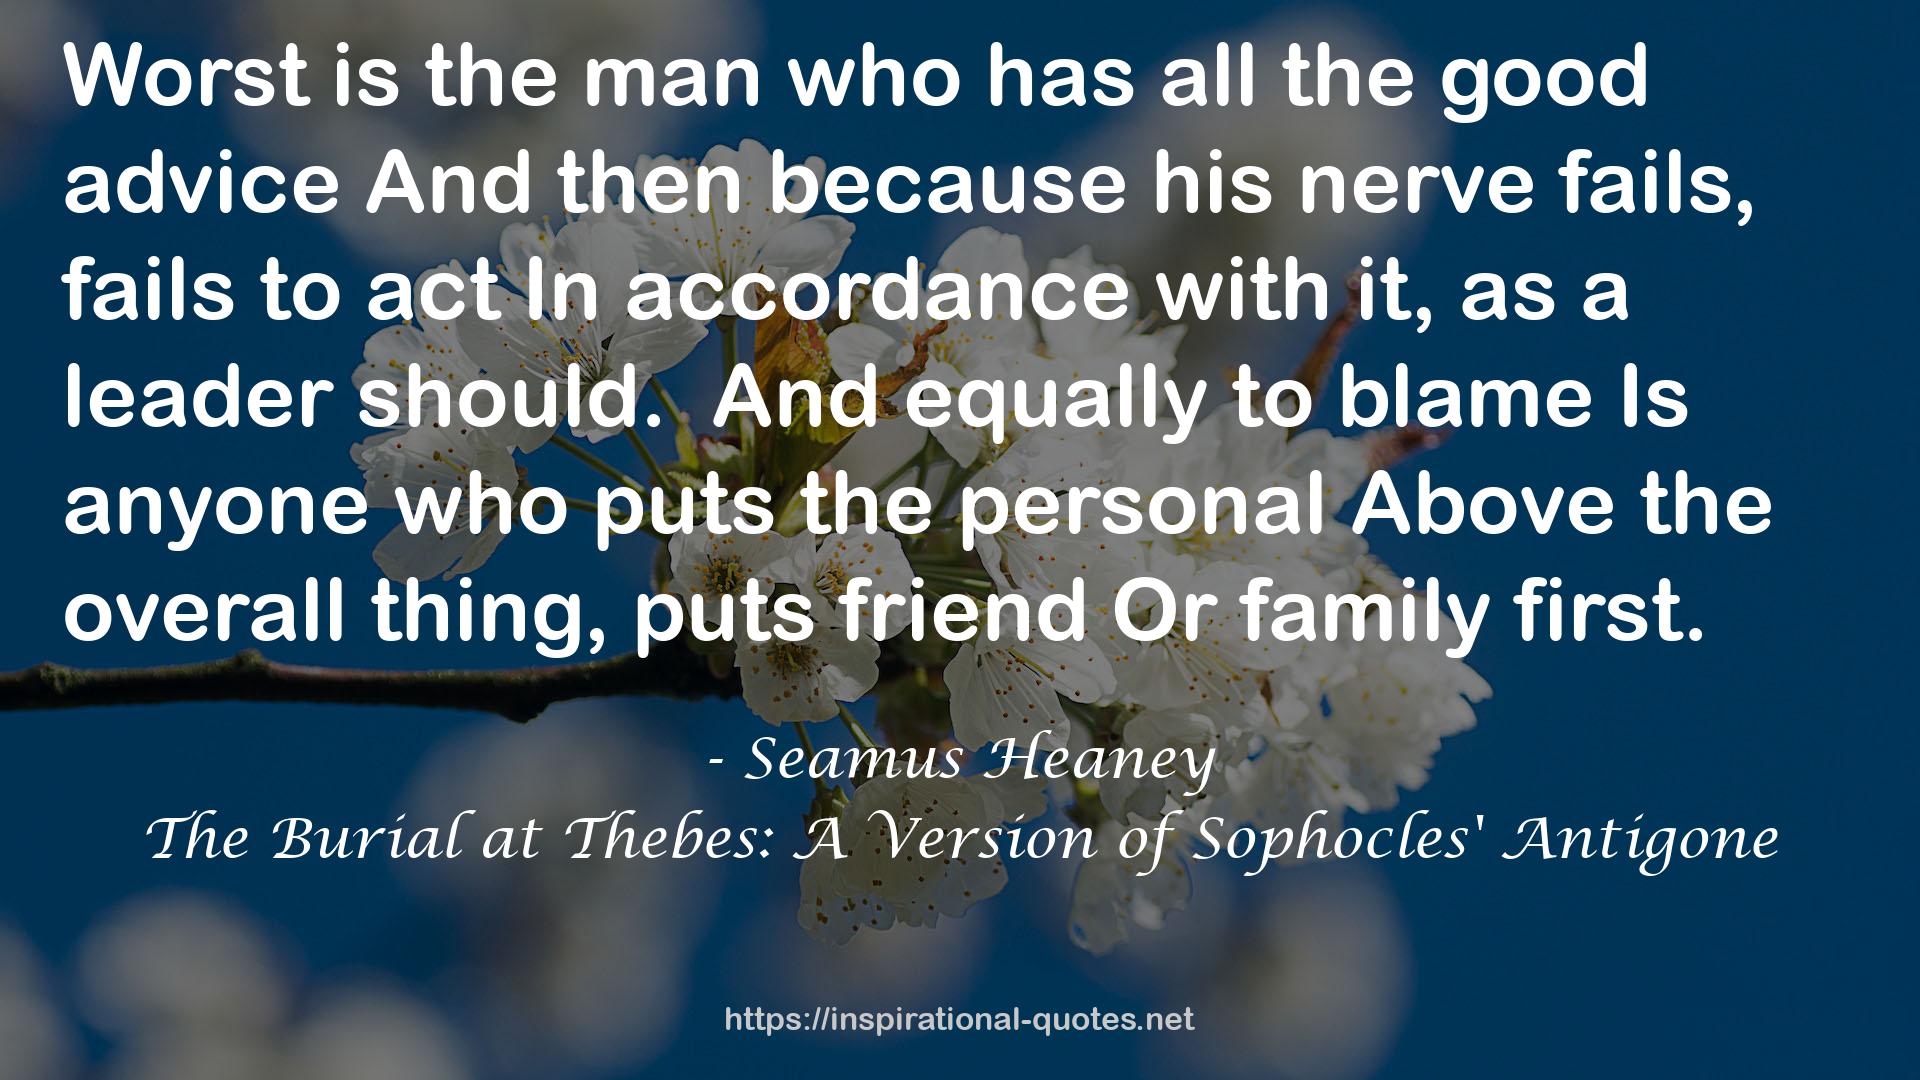 The Burial at Thebes: A Version of Sophocles' Antigone QUOTES